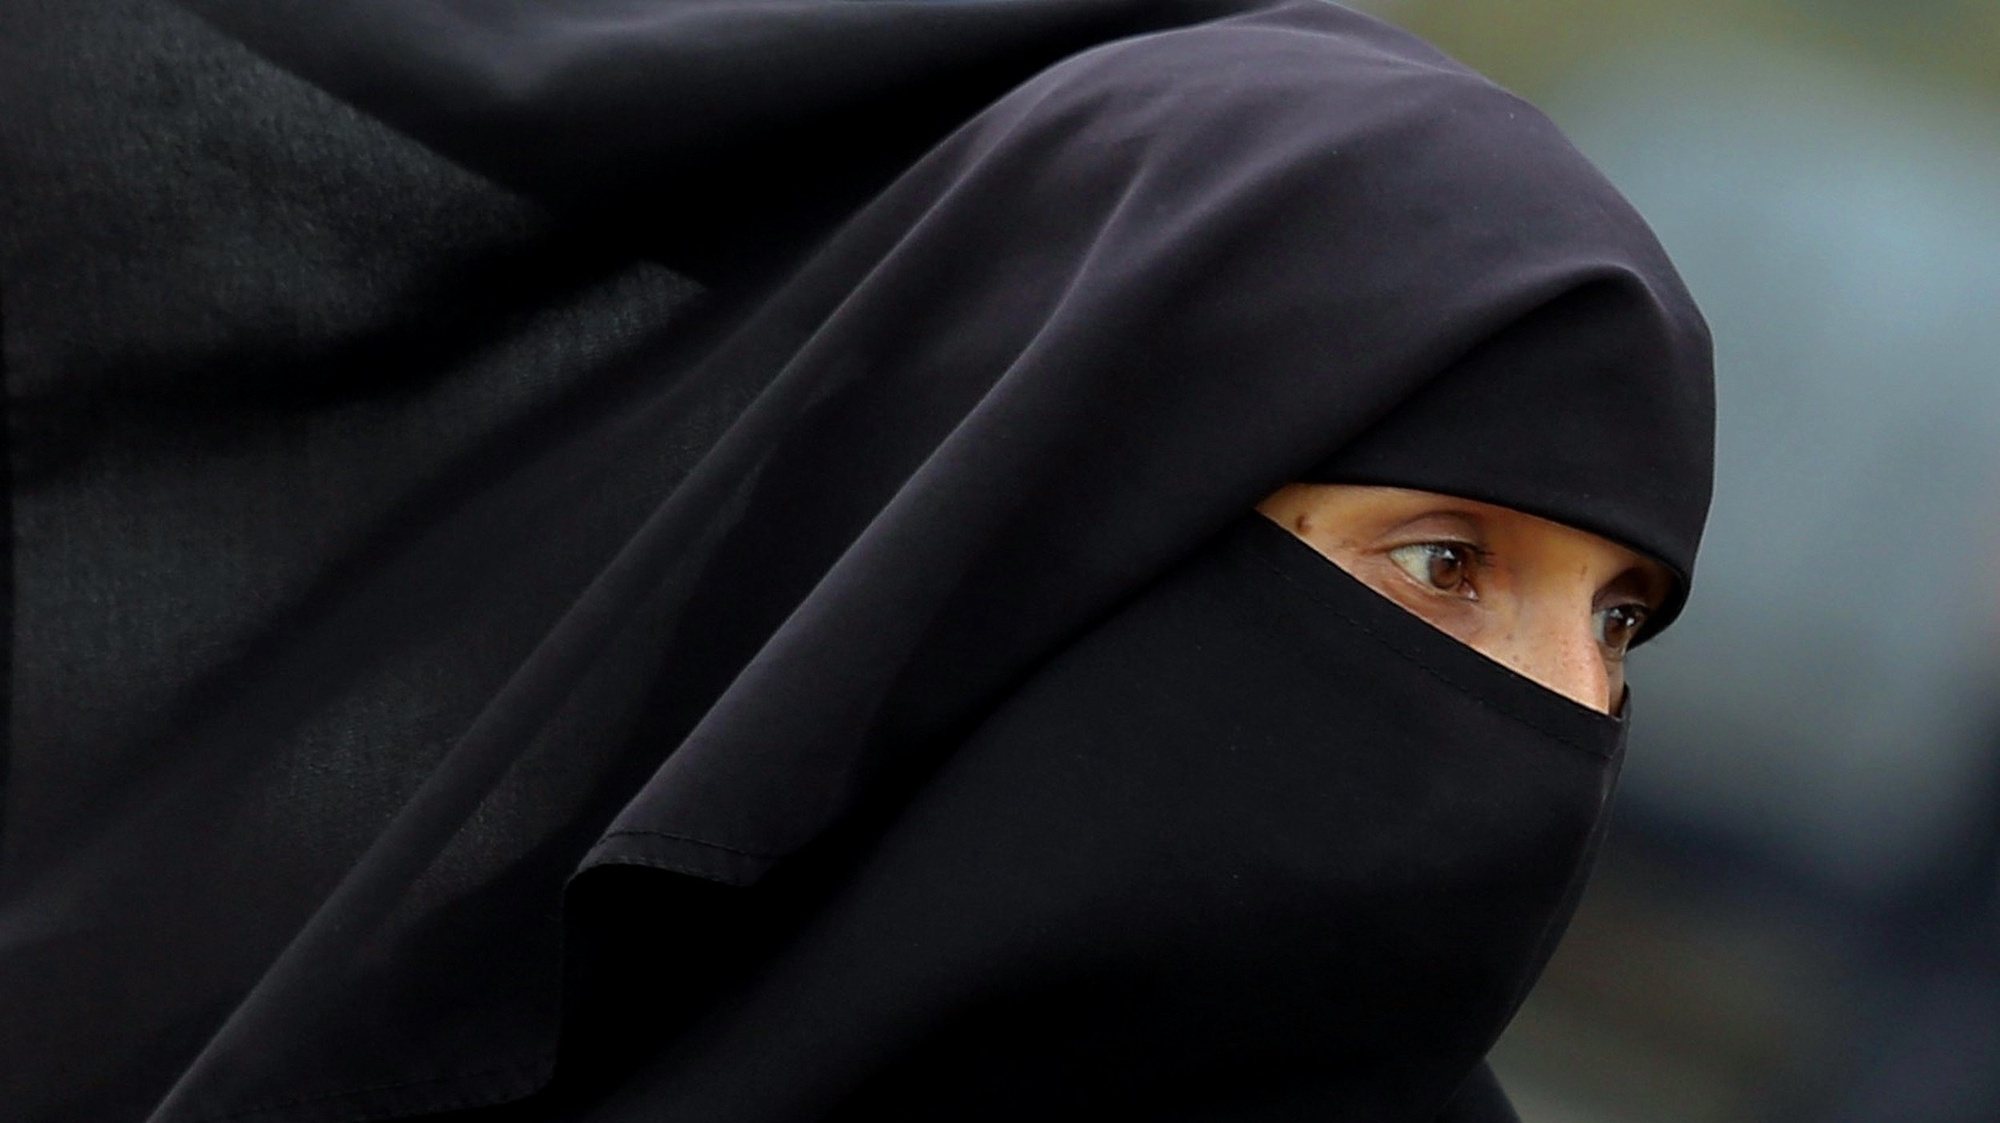 epa06157866 A close-up showing Indian Muslim woman wearing Burkha clad walks down, in Bangalore, India, 23 August 2017. India&#039;s Supreme Court on 22 August declared unconstitutional the Muslim practice of triple talaq where a husband can end a marriage unilaterally and instantly by repeating the word &#039;talaq&#039;, meaning &#039;I divorce&#039;, three times.  EPA/JAGADEESH NV